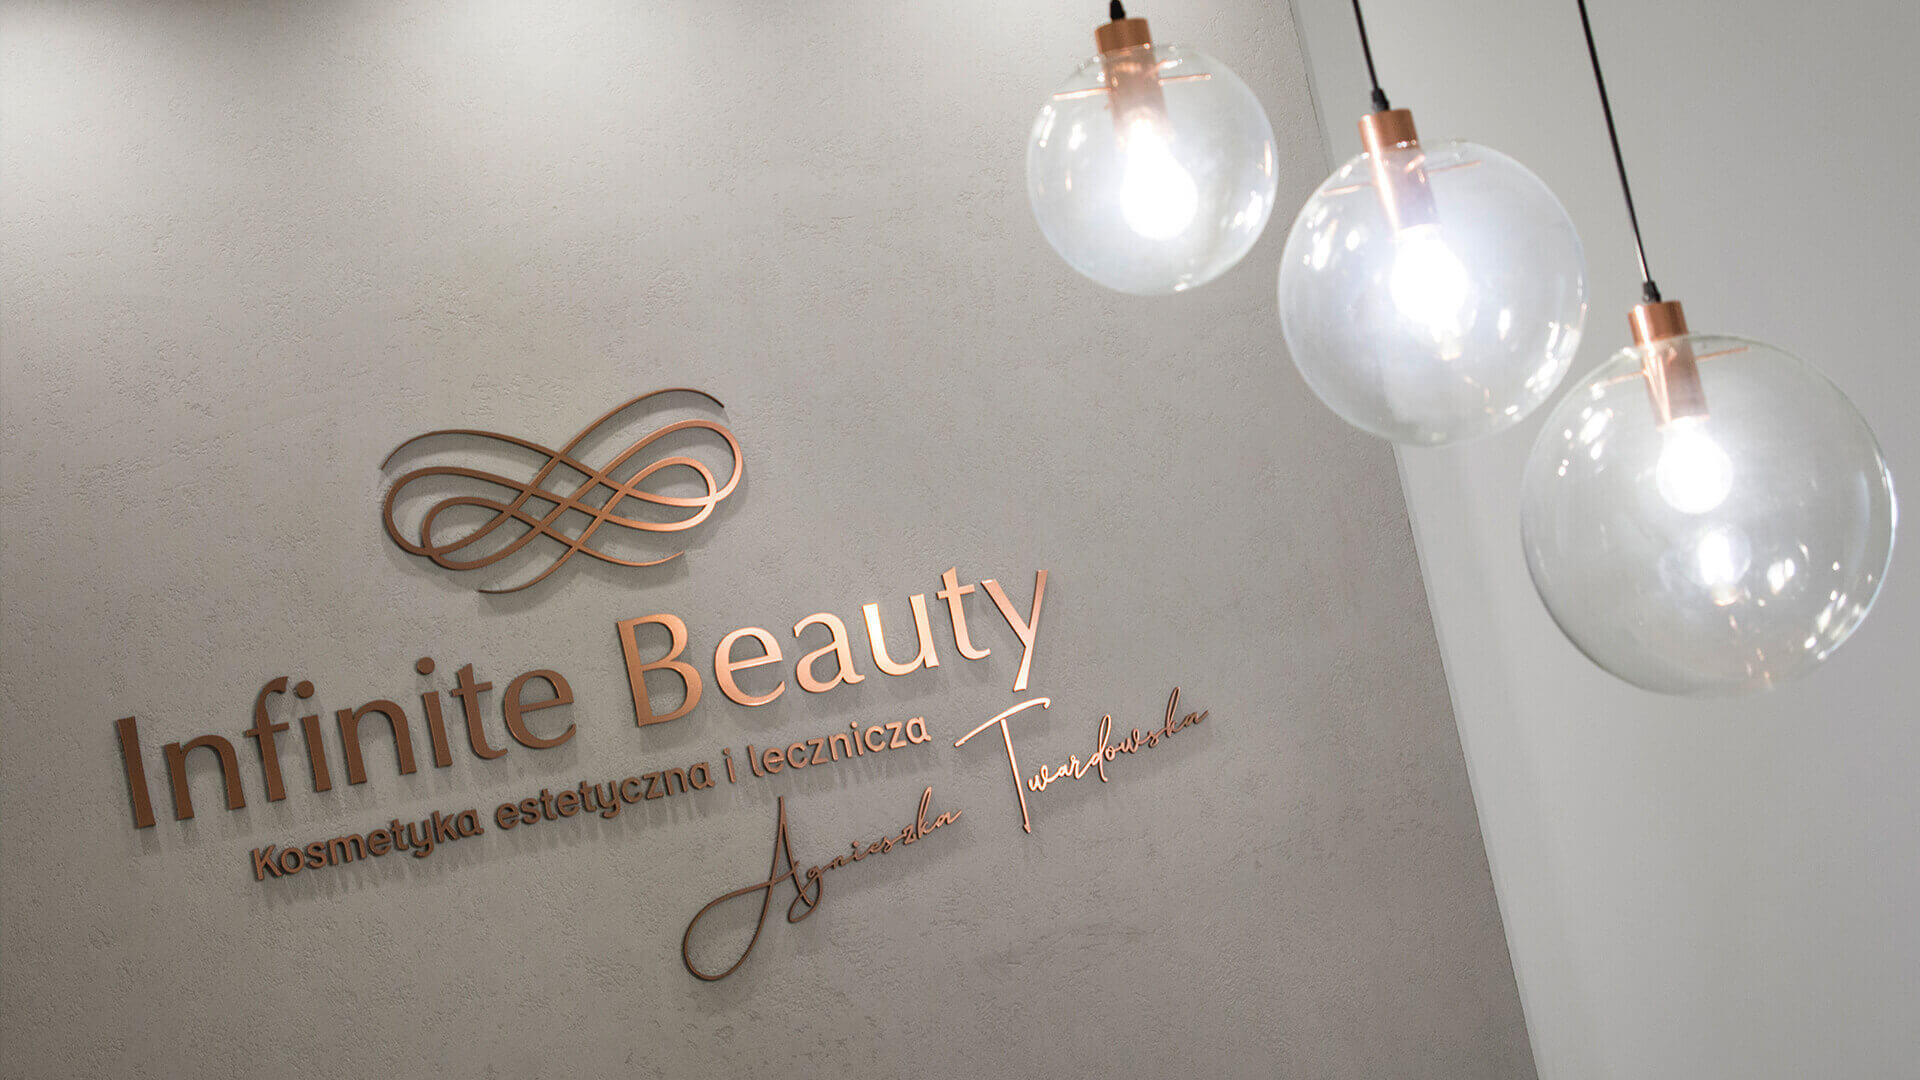 Infinite Beauty - stainless steel letters-infinite-beauty letters-on-a-concrete-wall-behind-reception-space letters-exclusive-premium letters(15)